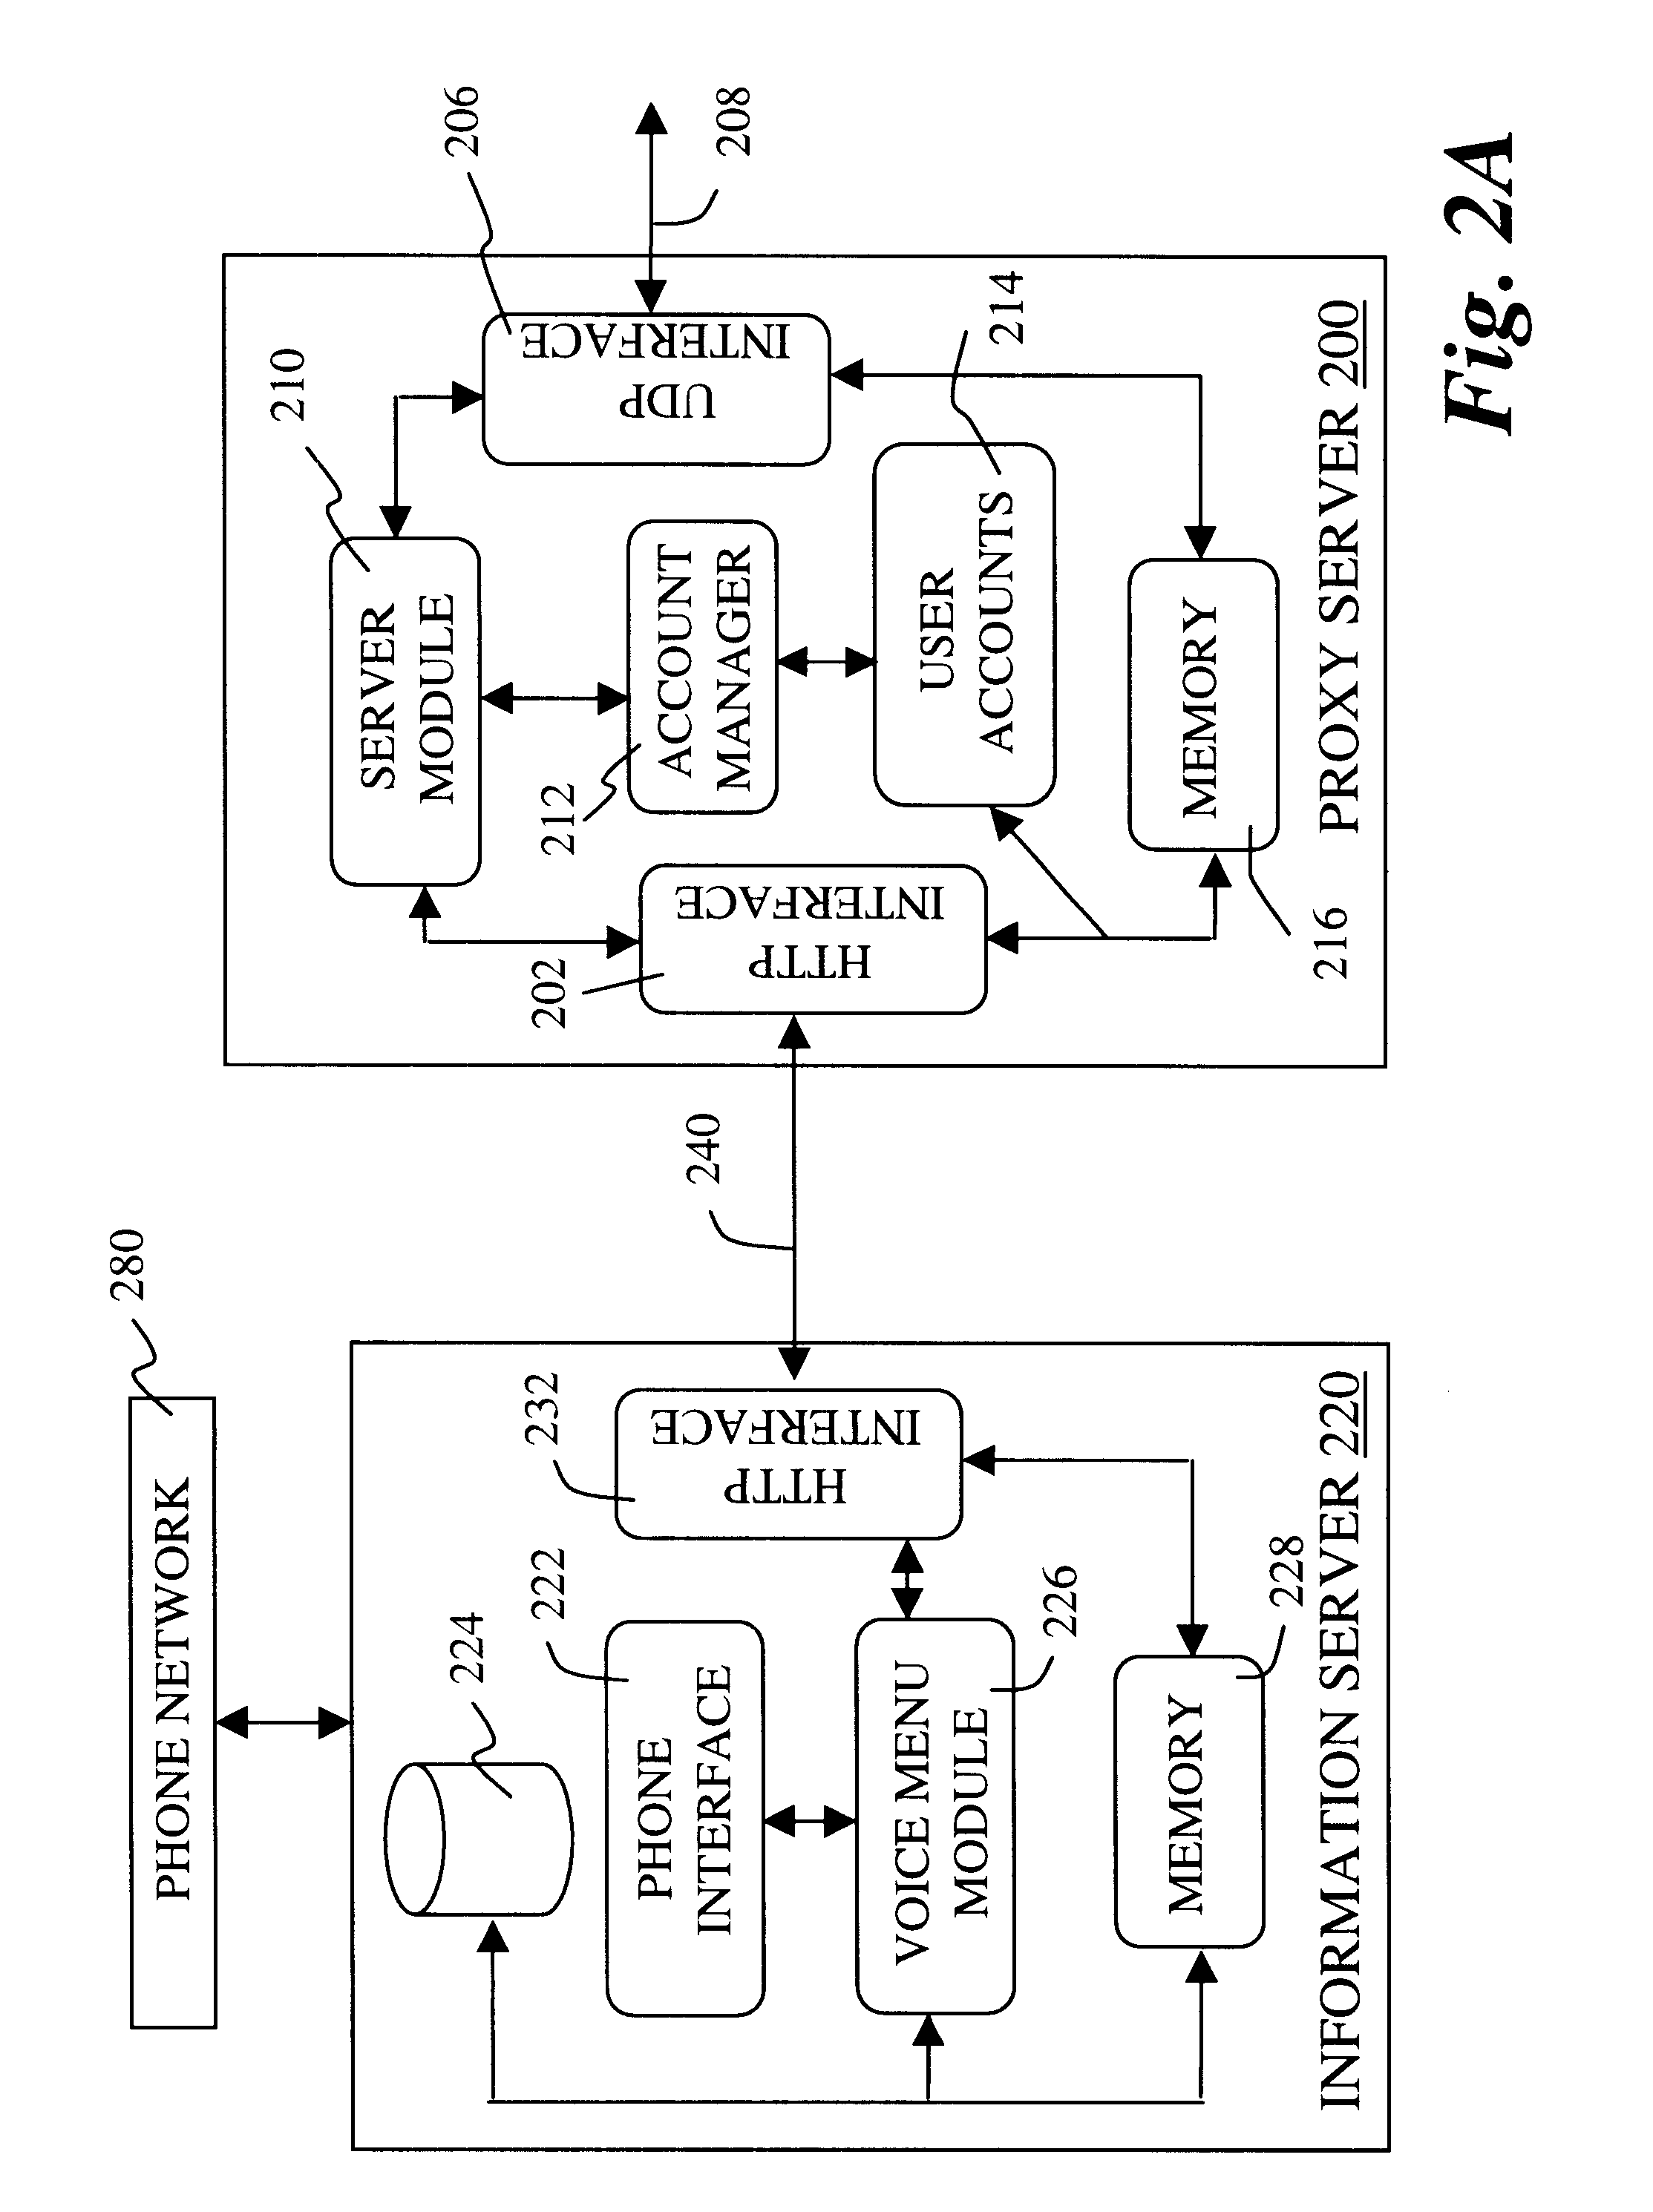 Automated access by mobile device to automated telephone information services